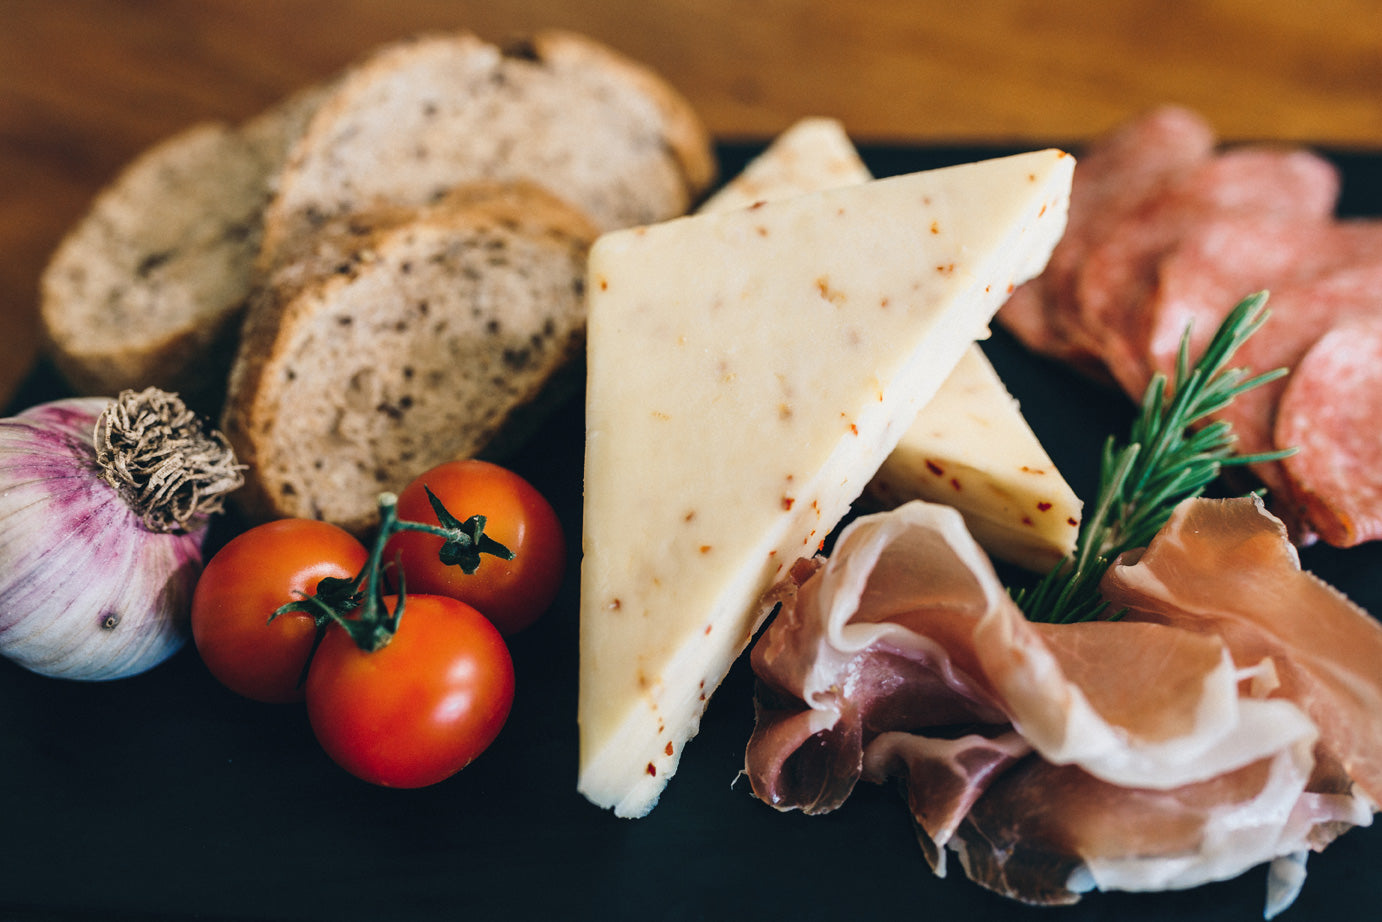 Qualicum Spice cheese is displayed with an array of foods, including sliced cured meats, tomatoes, garlic, and sliced bread. The cheese is subtly flecked with red flakes of paprika.